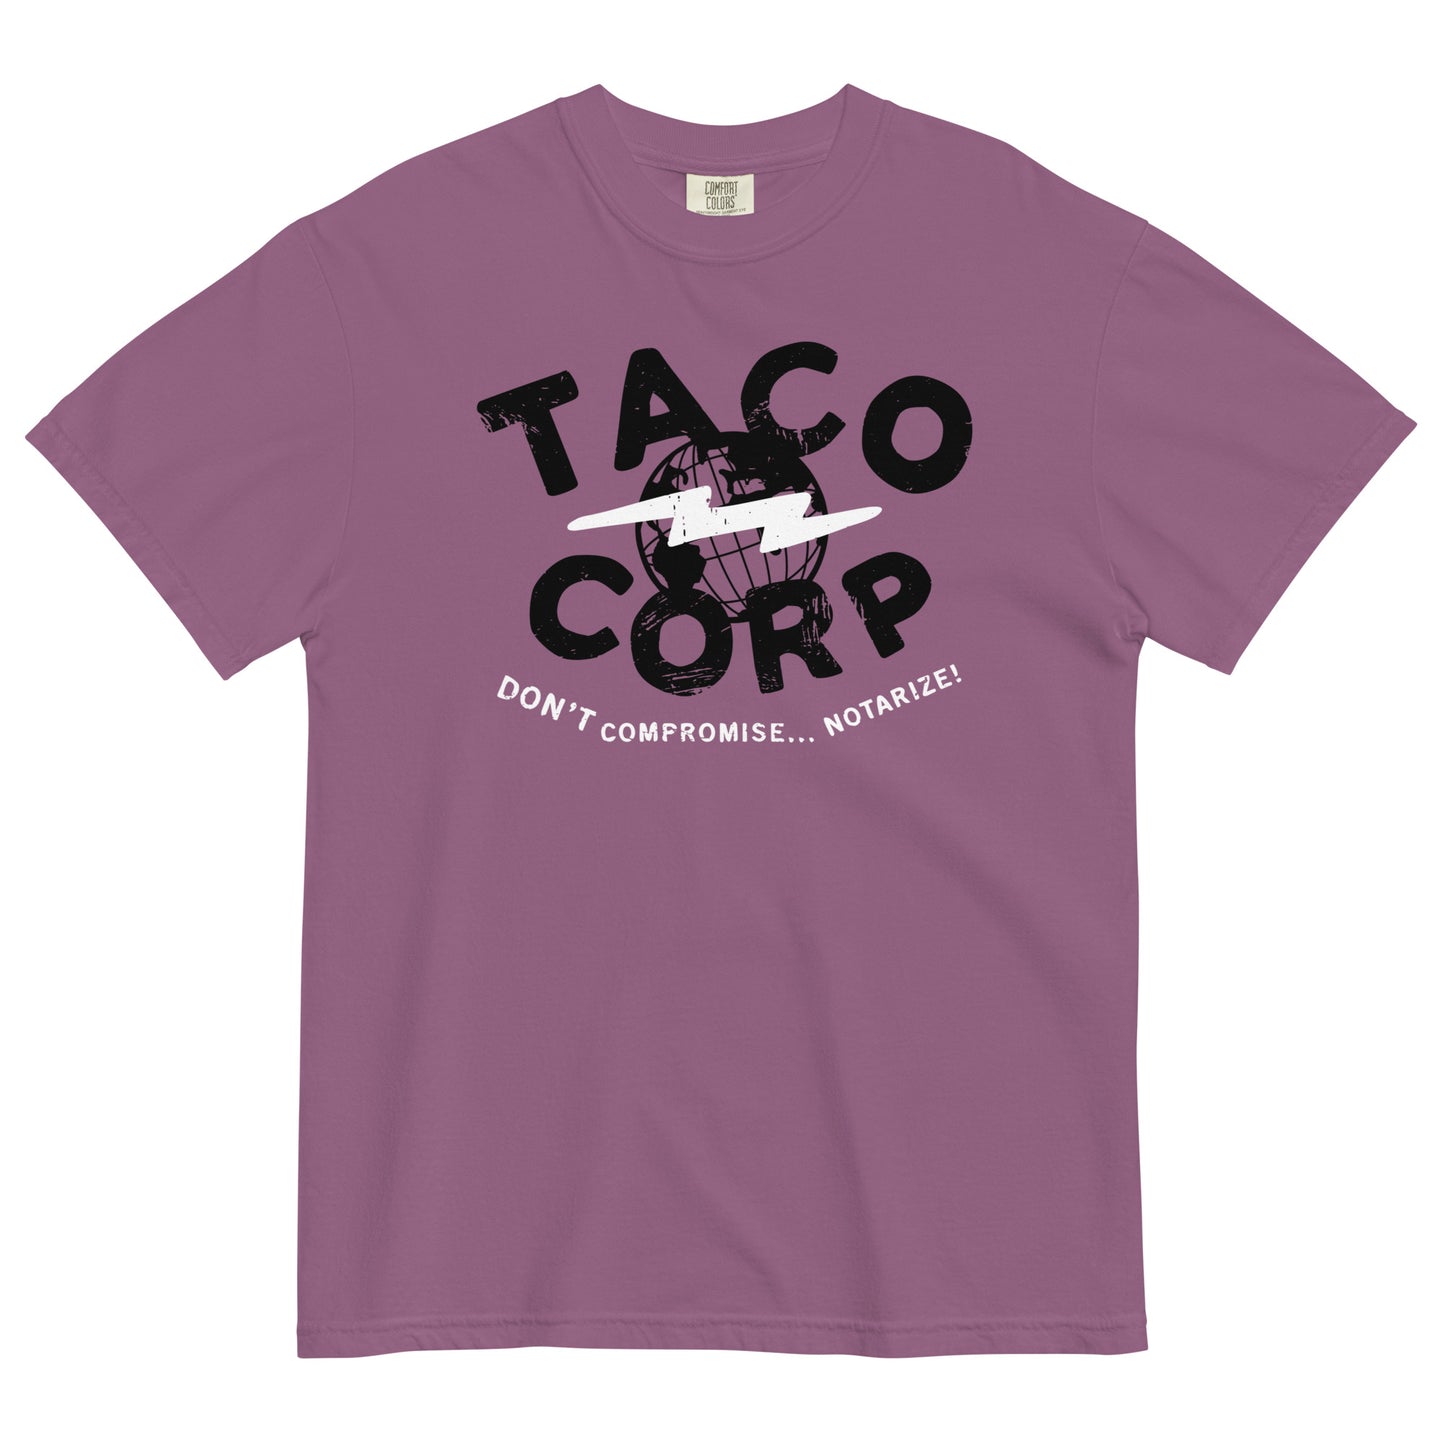 Taco Corp Men's Relaxed Fit Tee